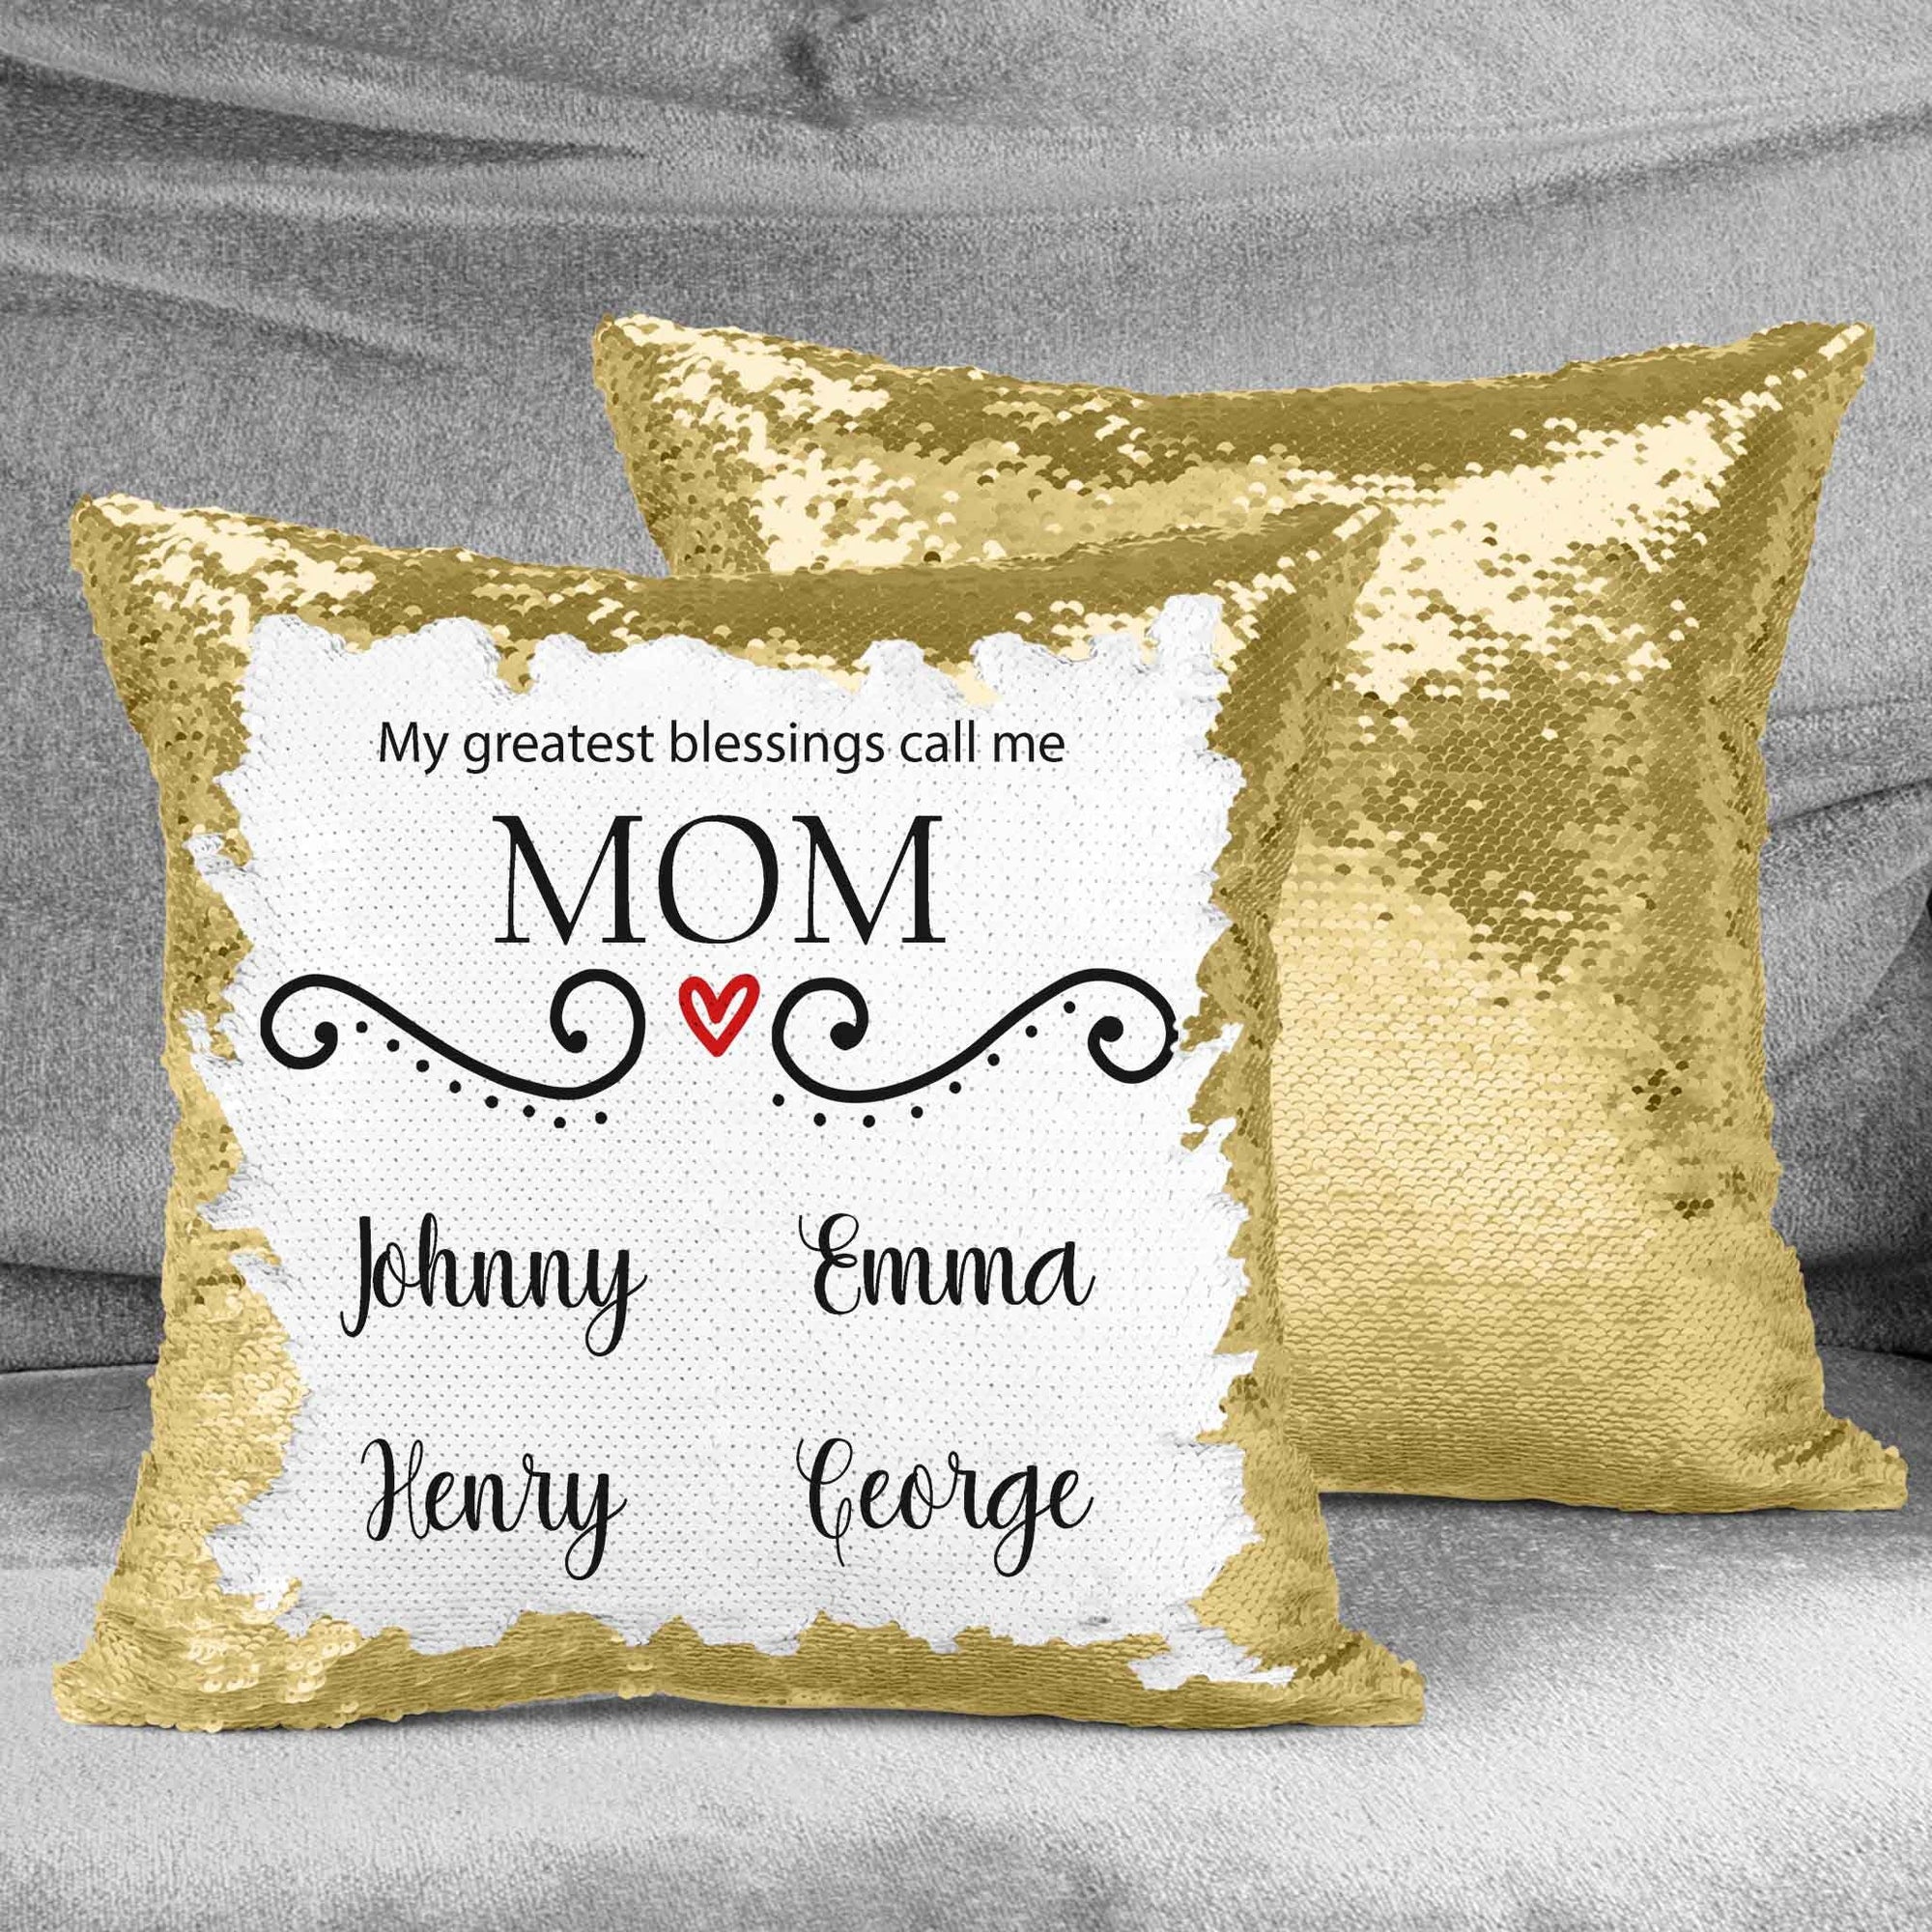 Personalized Sequin Throw Pillow | Custom Sequin Pillow | Mom's Greatest Blessing